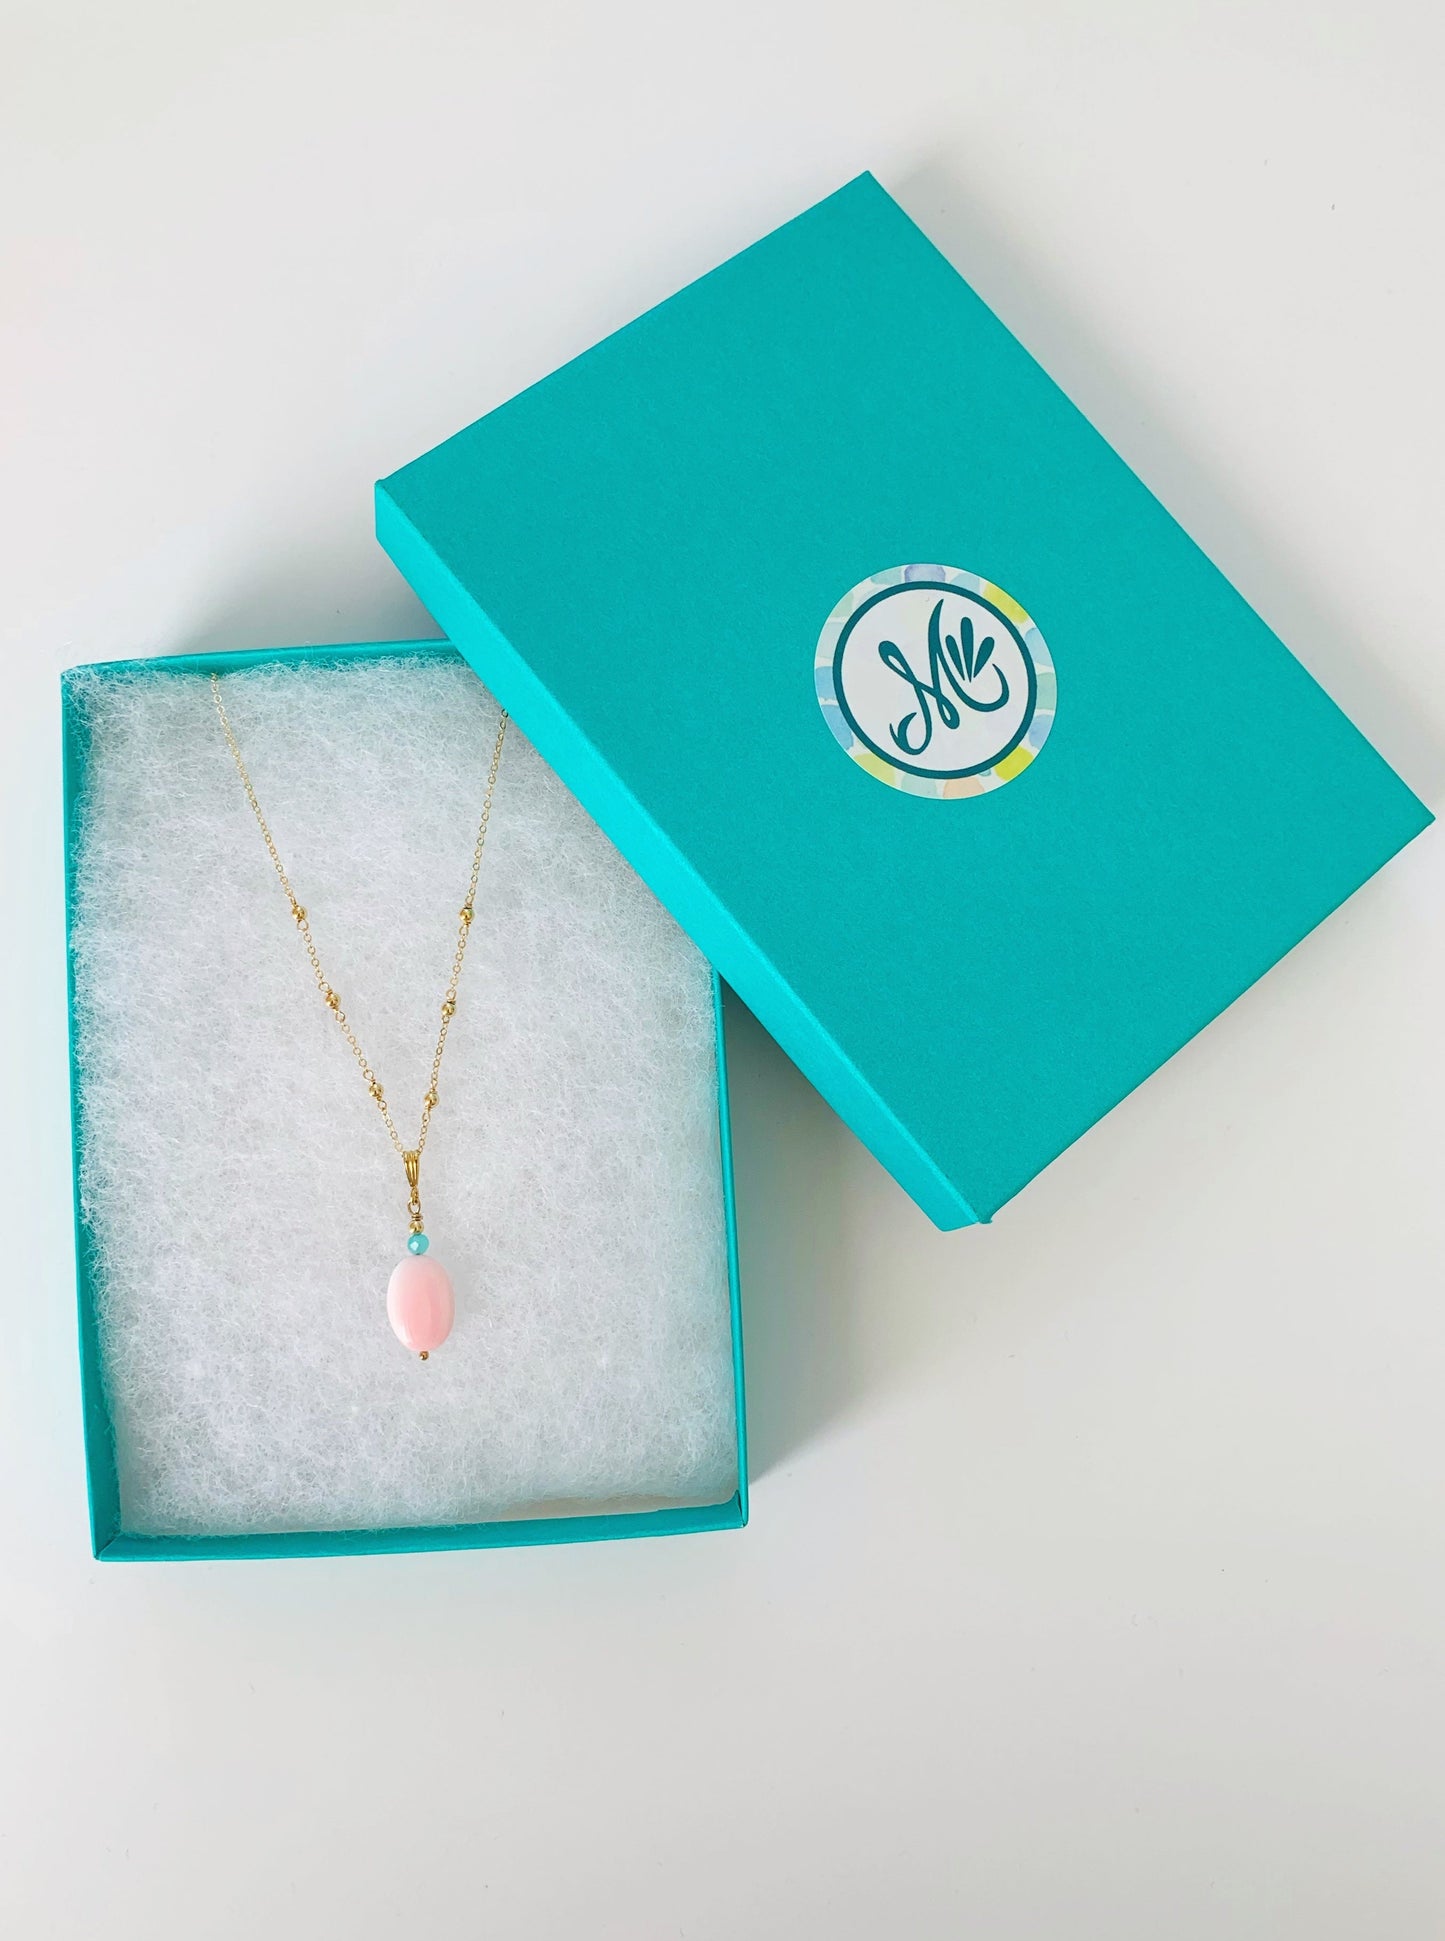 the sanibel necklace photographed in a teal gift box on a white surface